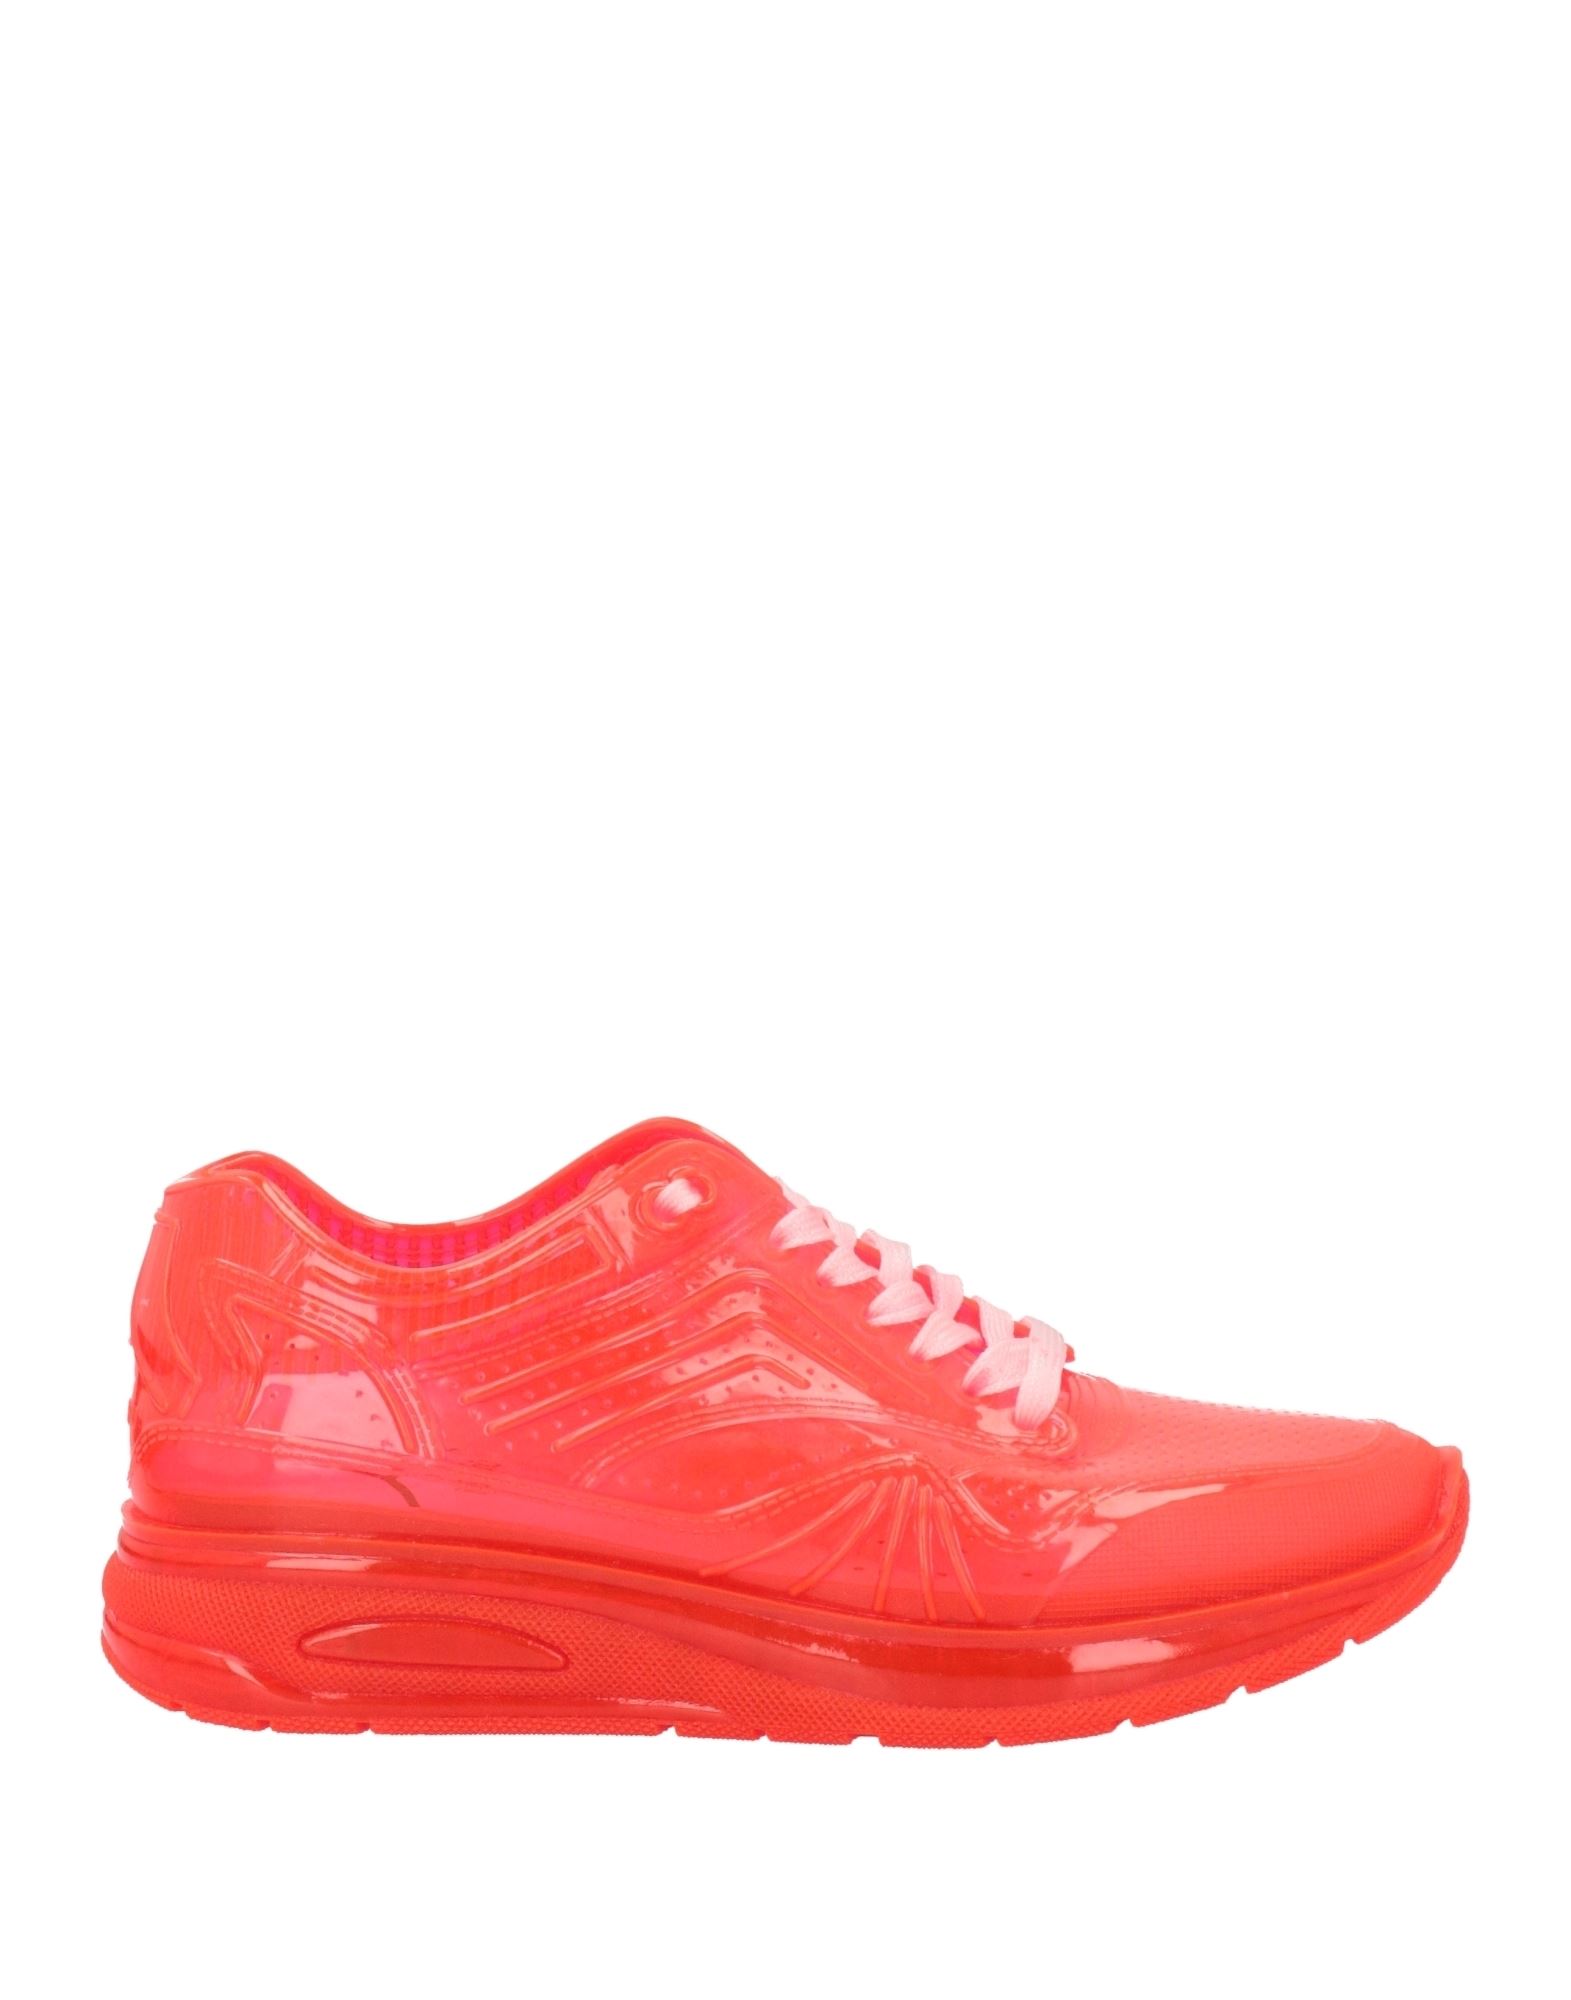 Airdp By Ishu+ Sneakers In Coral